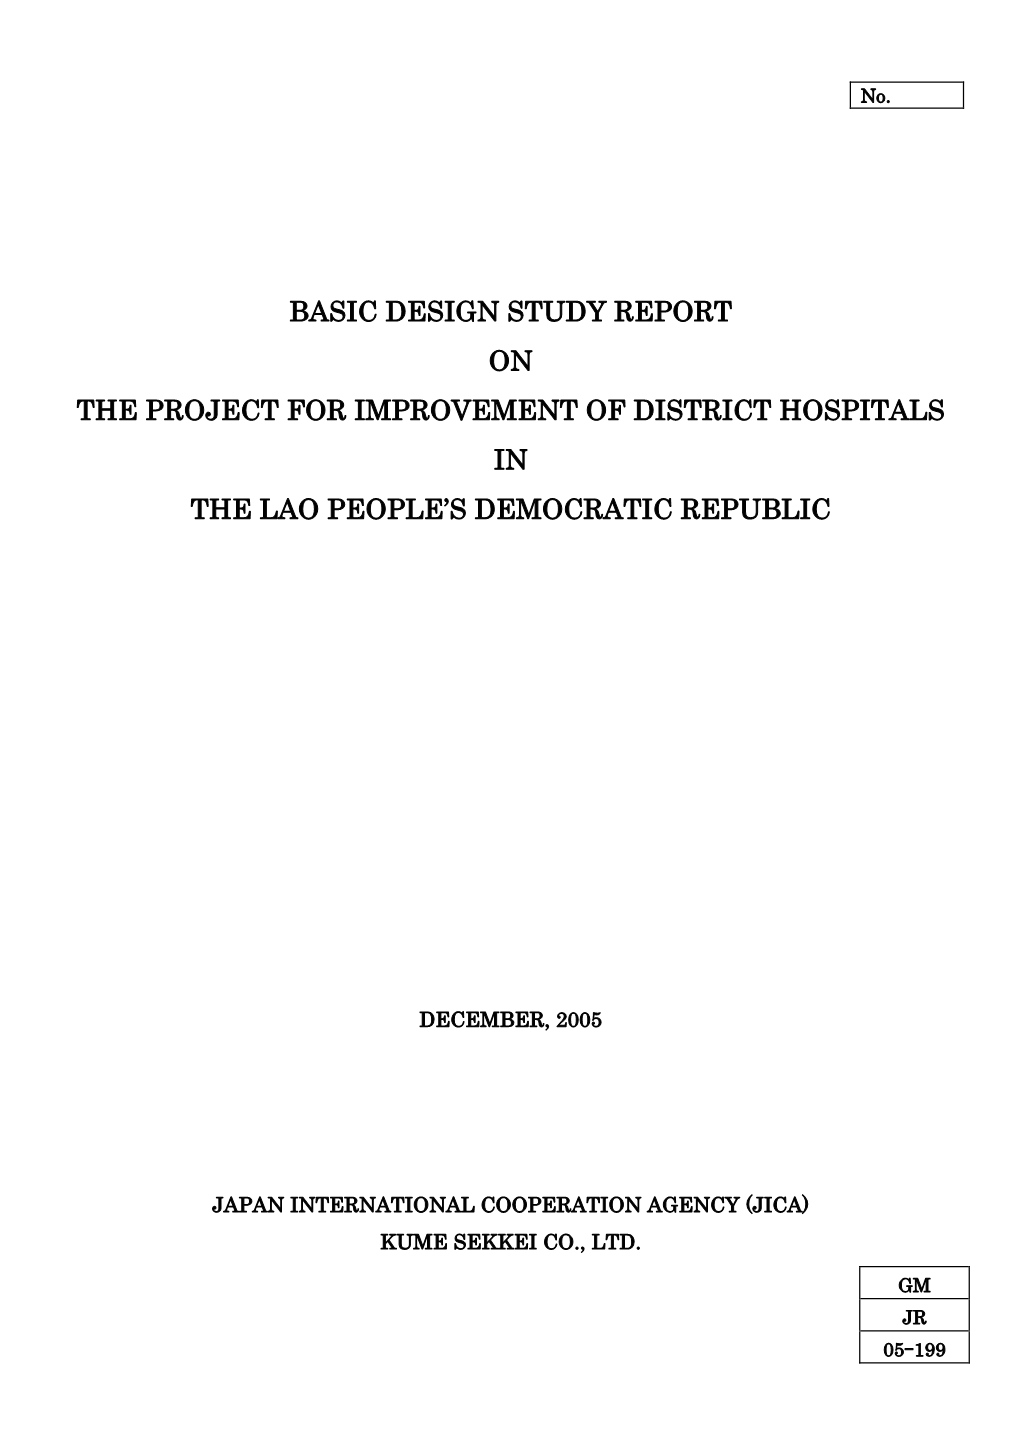 Basic Design Study Report on the Project for Improvement of District Hospitals in the Lao People's Democratic Republic